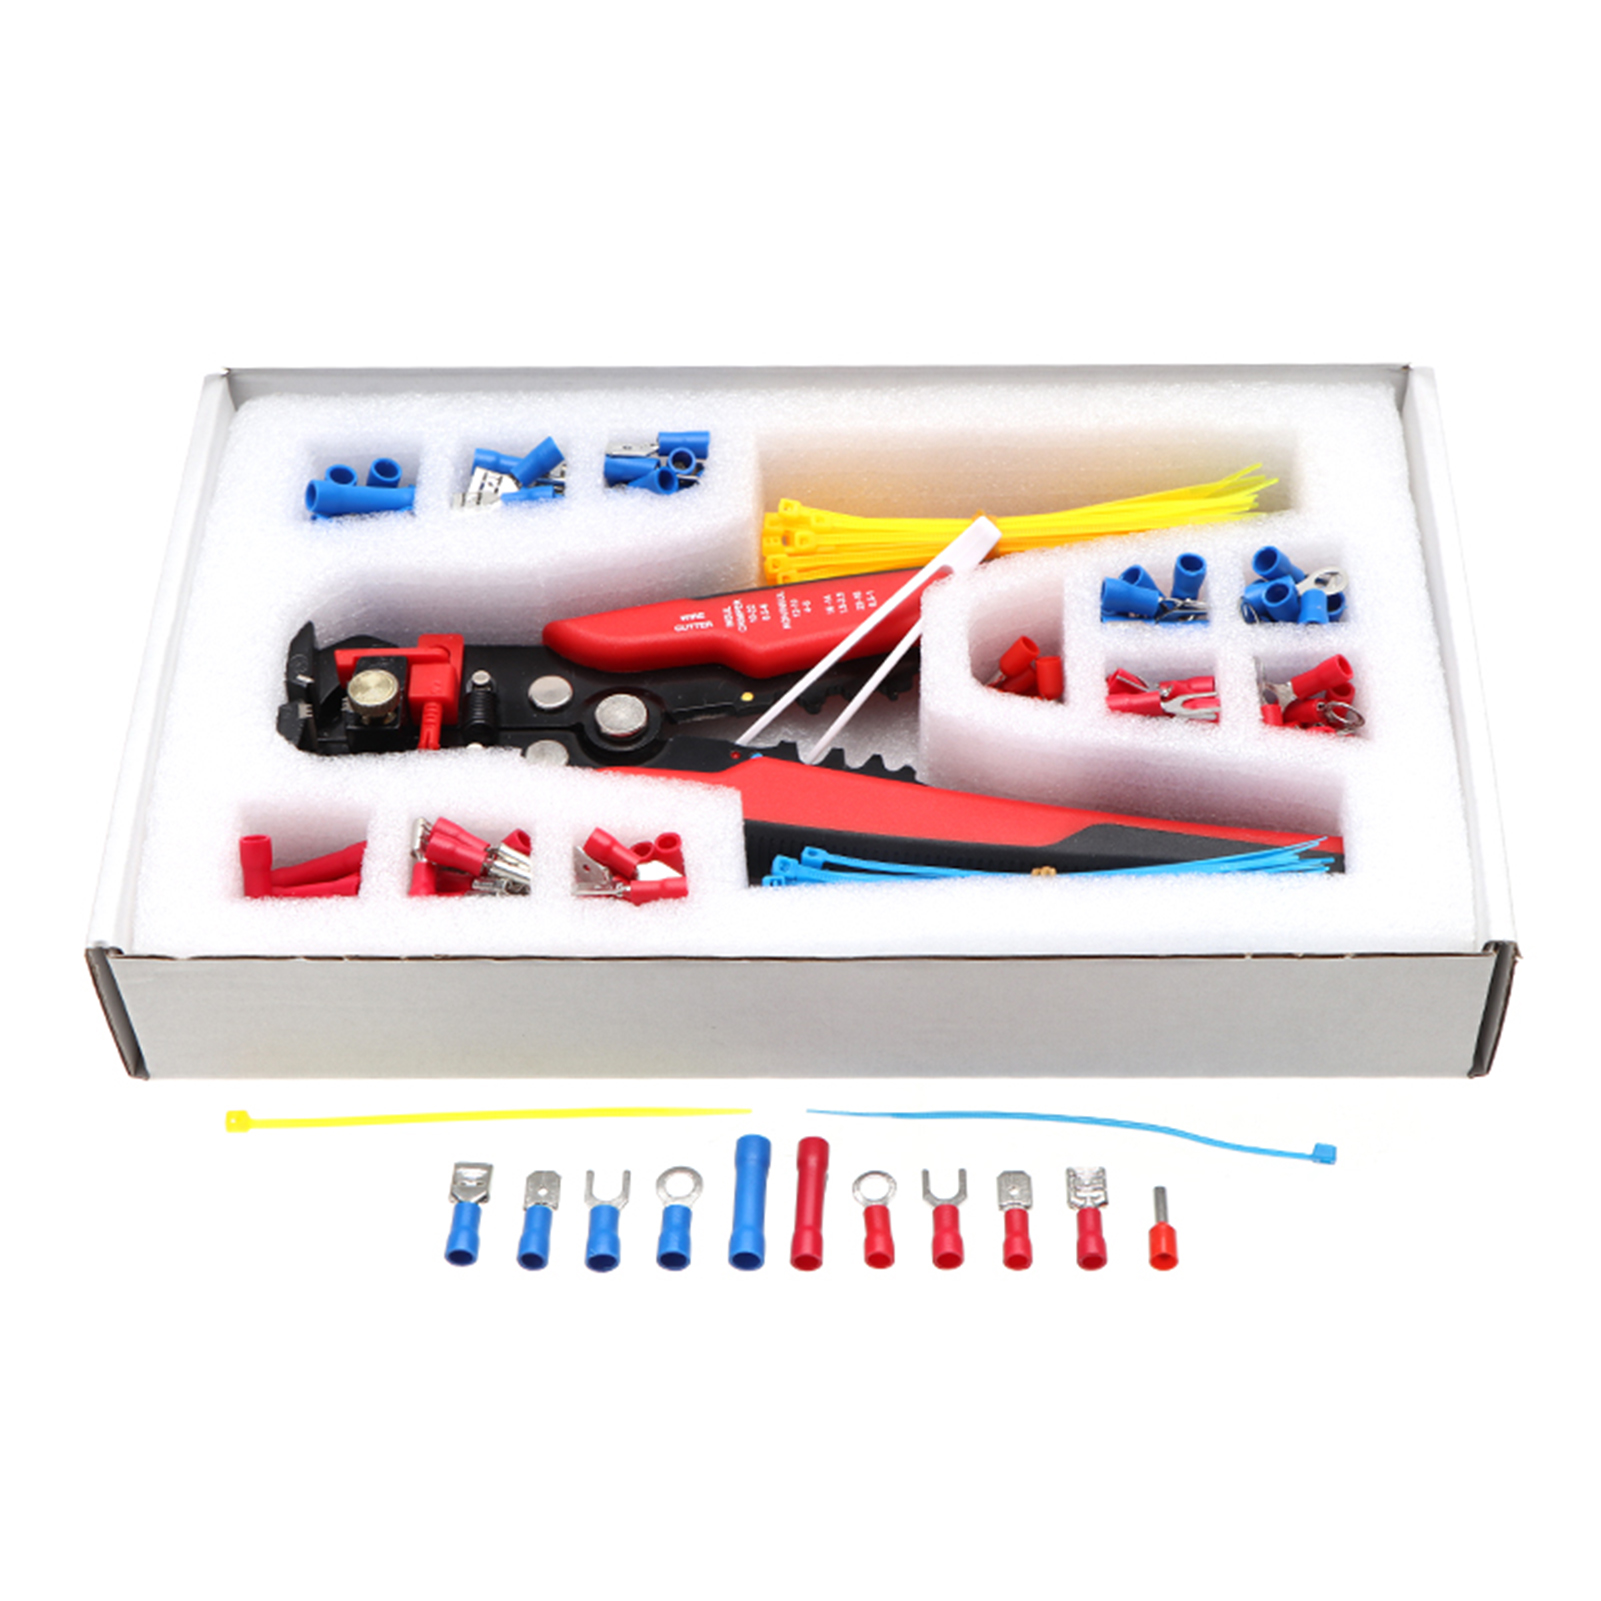 260PCS-Crimp-Cable-Terminals-Set-Kit-Heat-Shrink-Insulated-Wire-Electrical-Connector-Assorted-Box-wi-1918948-2